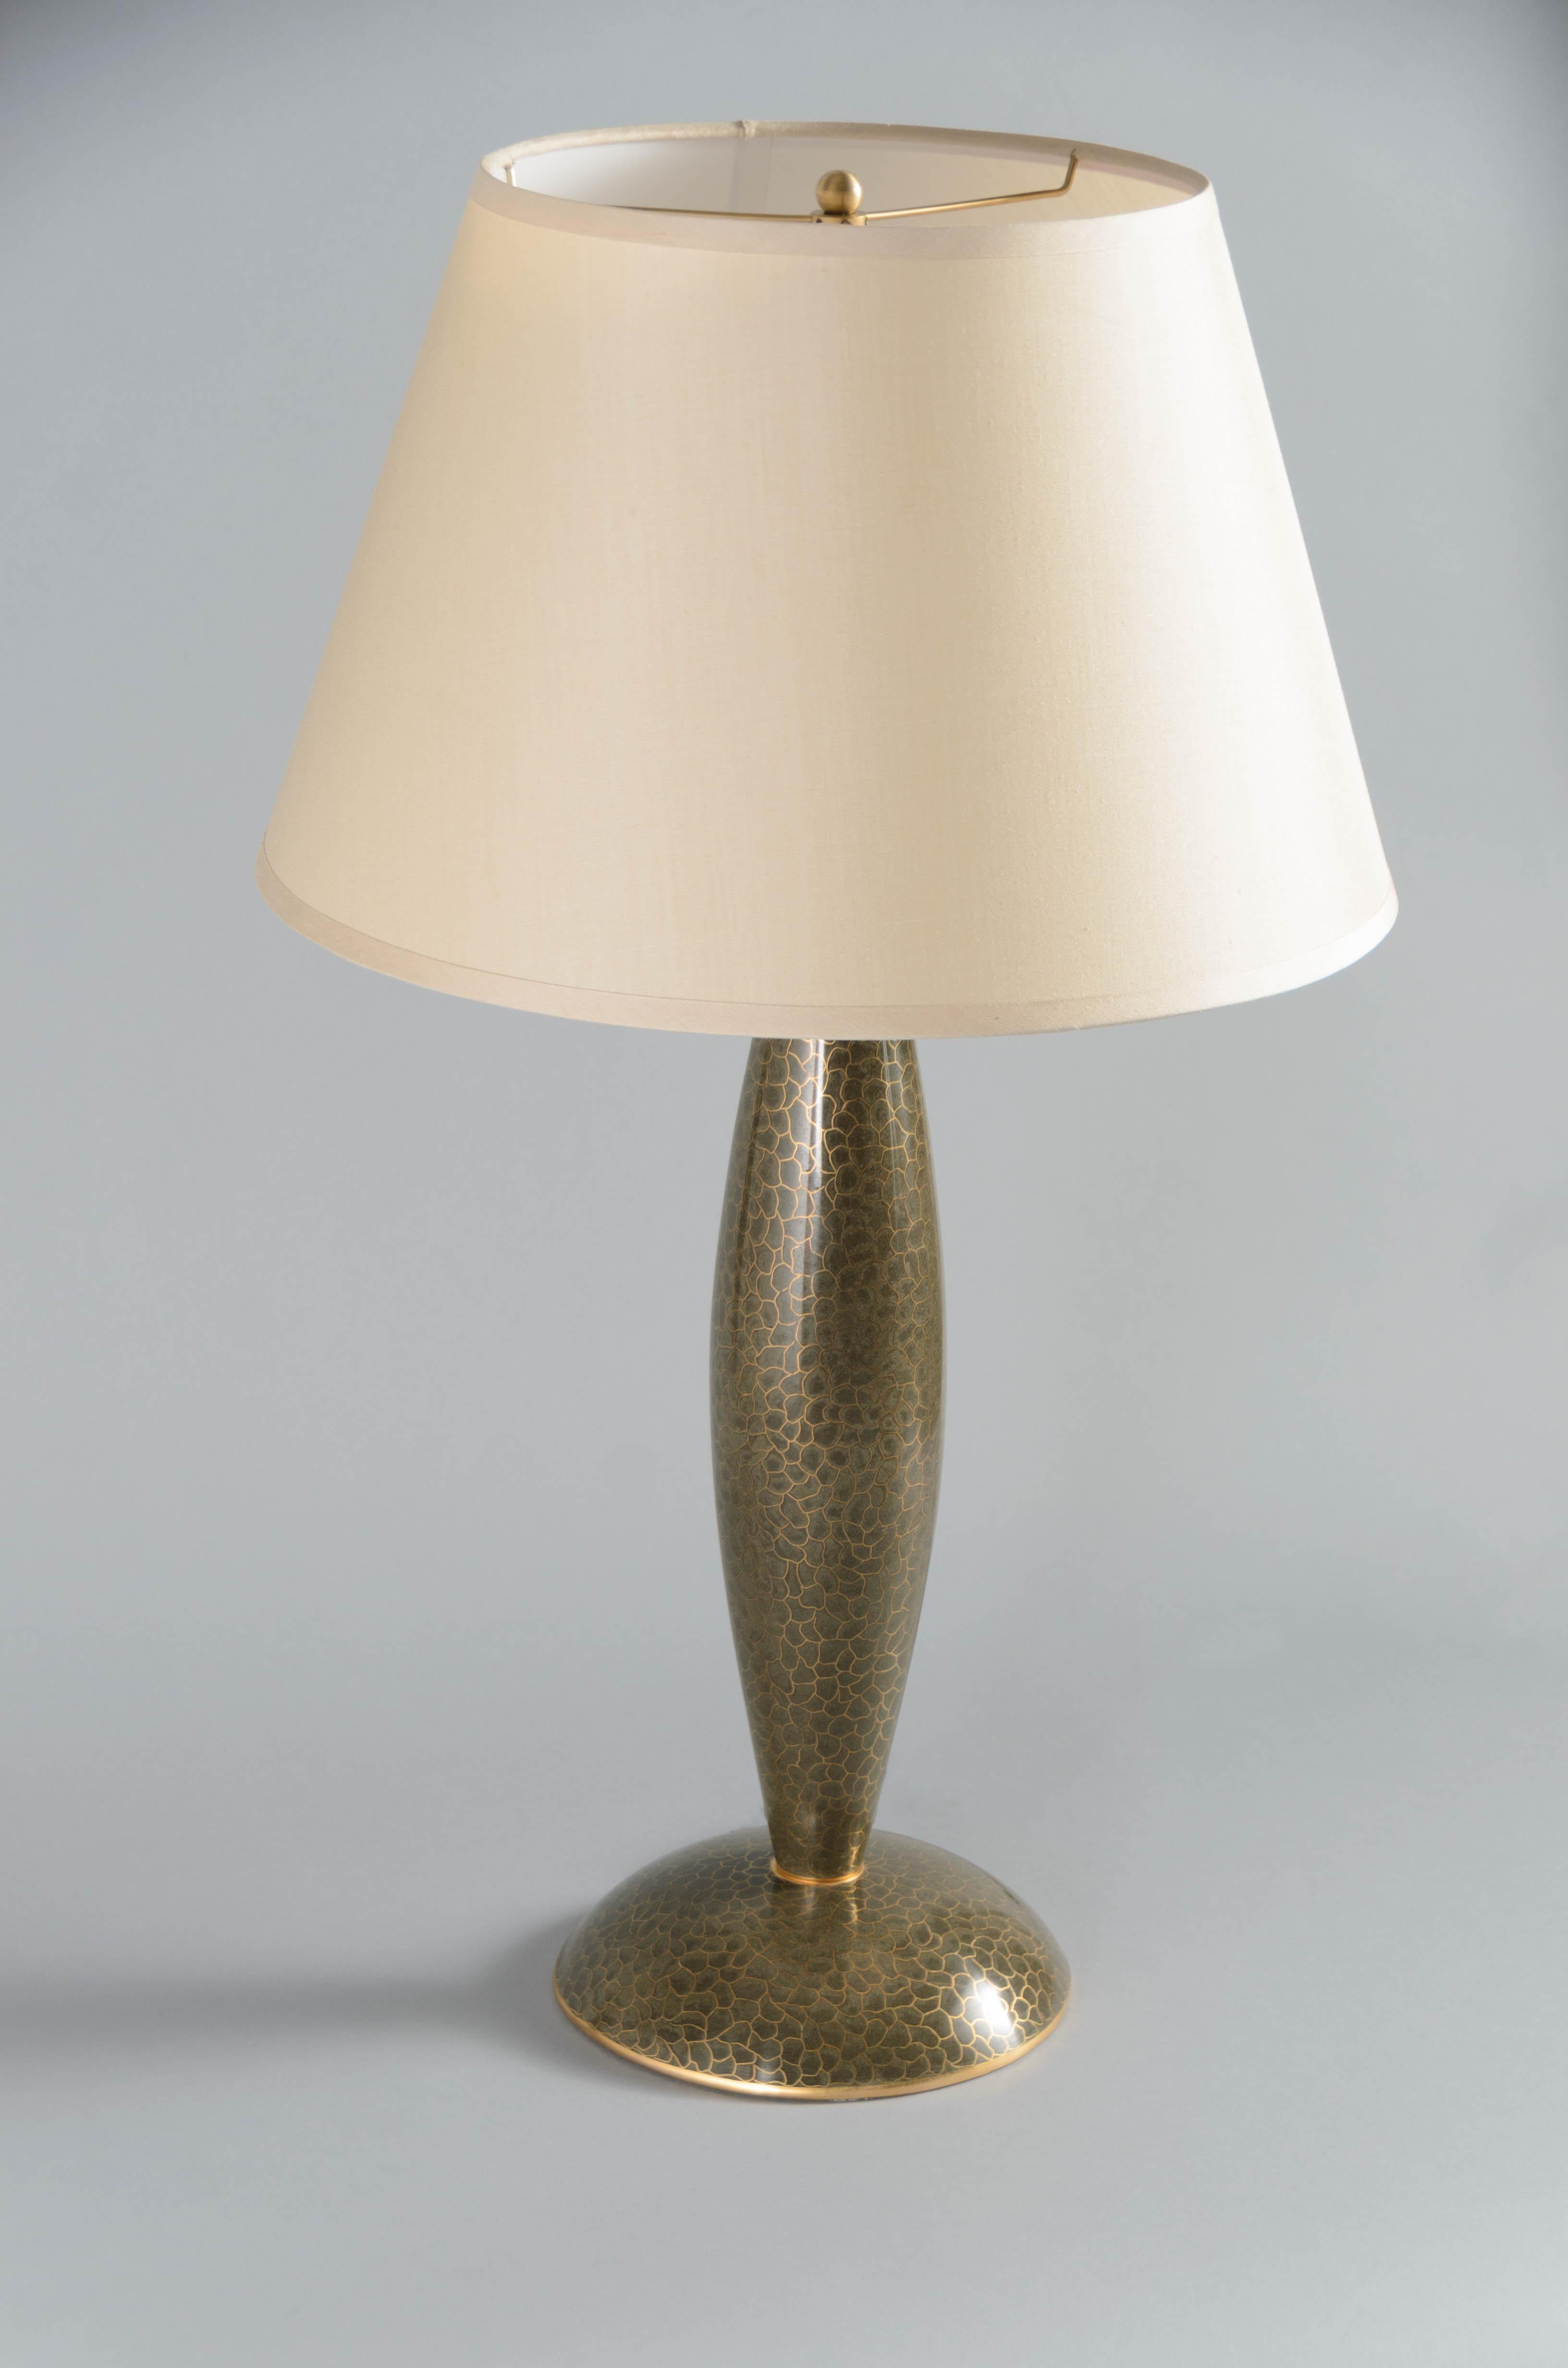 Modern Contemporary Cloisonné Baluster Lamp in Moss by Robert Kuo, Limited Edition For Sale